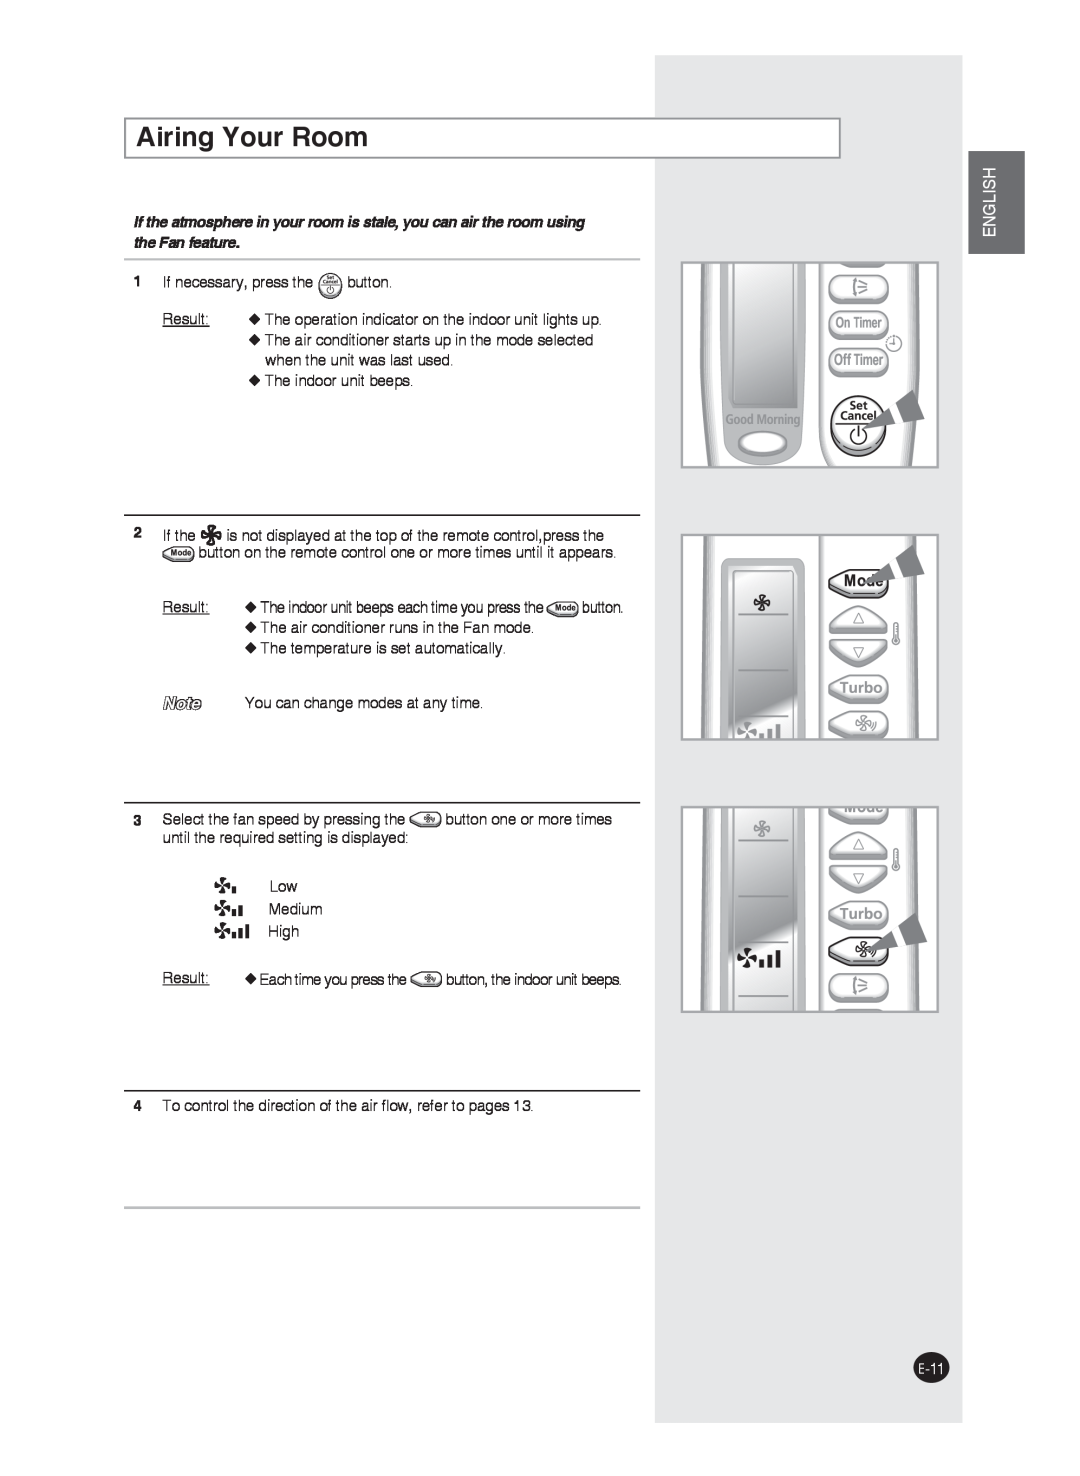 Samsung AS12J, AS09F, AS24J, AS24W, AS24F, AS18J, AS18W, AS12W, AS18F, AS09J, AS09W, AS12F user manual Airing Your Room, English, E-11 